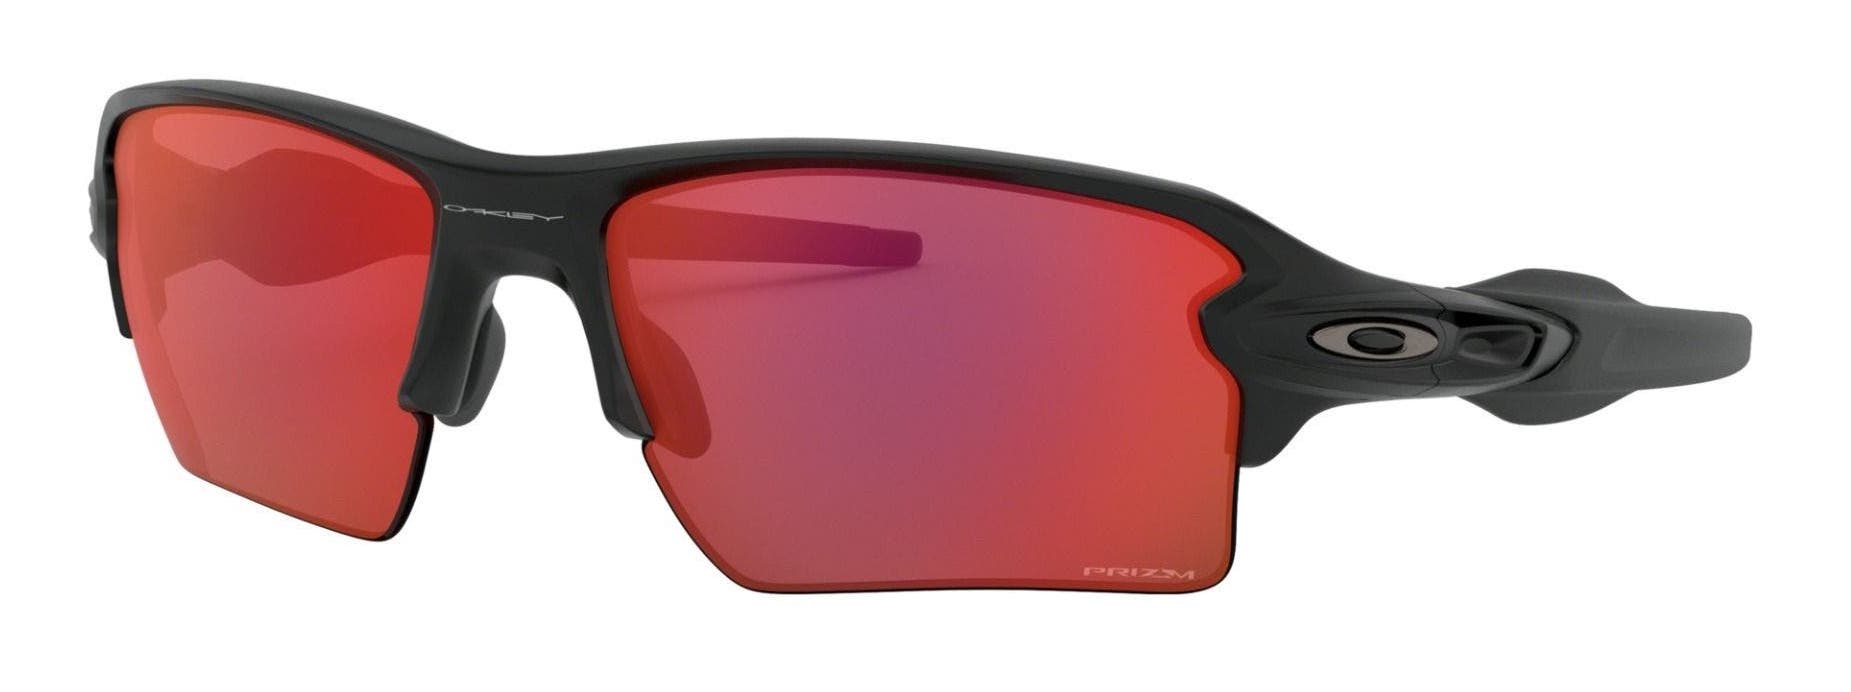 Oakley Flak 2.0 XL sunglasses in matte black with PRIZM trail torch red lenses